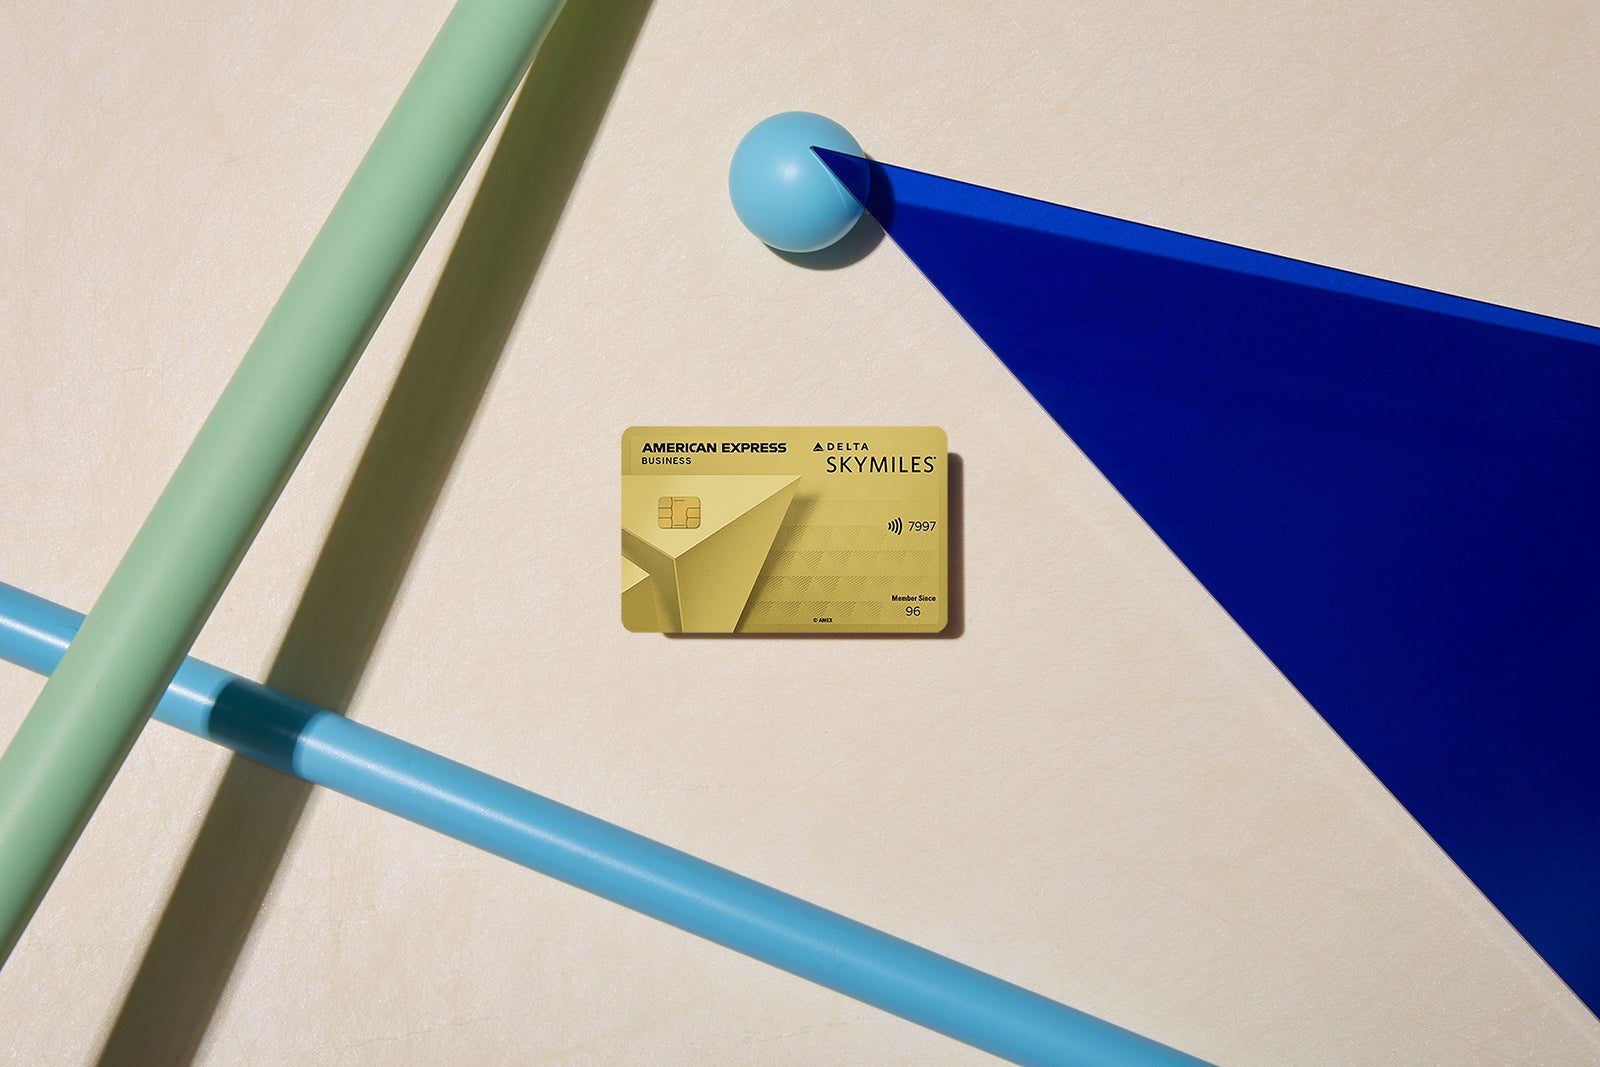 Delta SkyMiles Gold Business American Express card